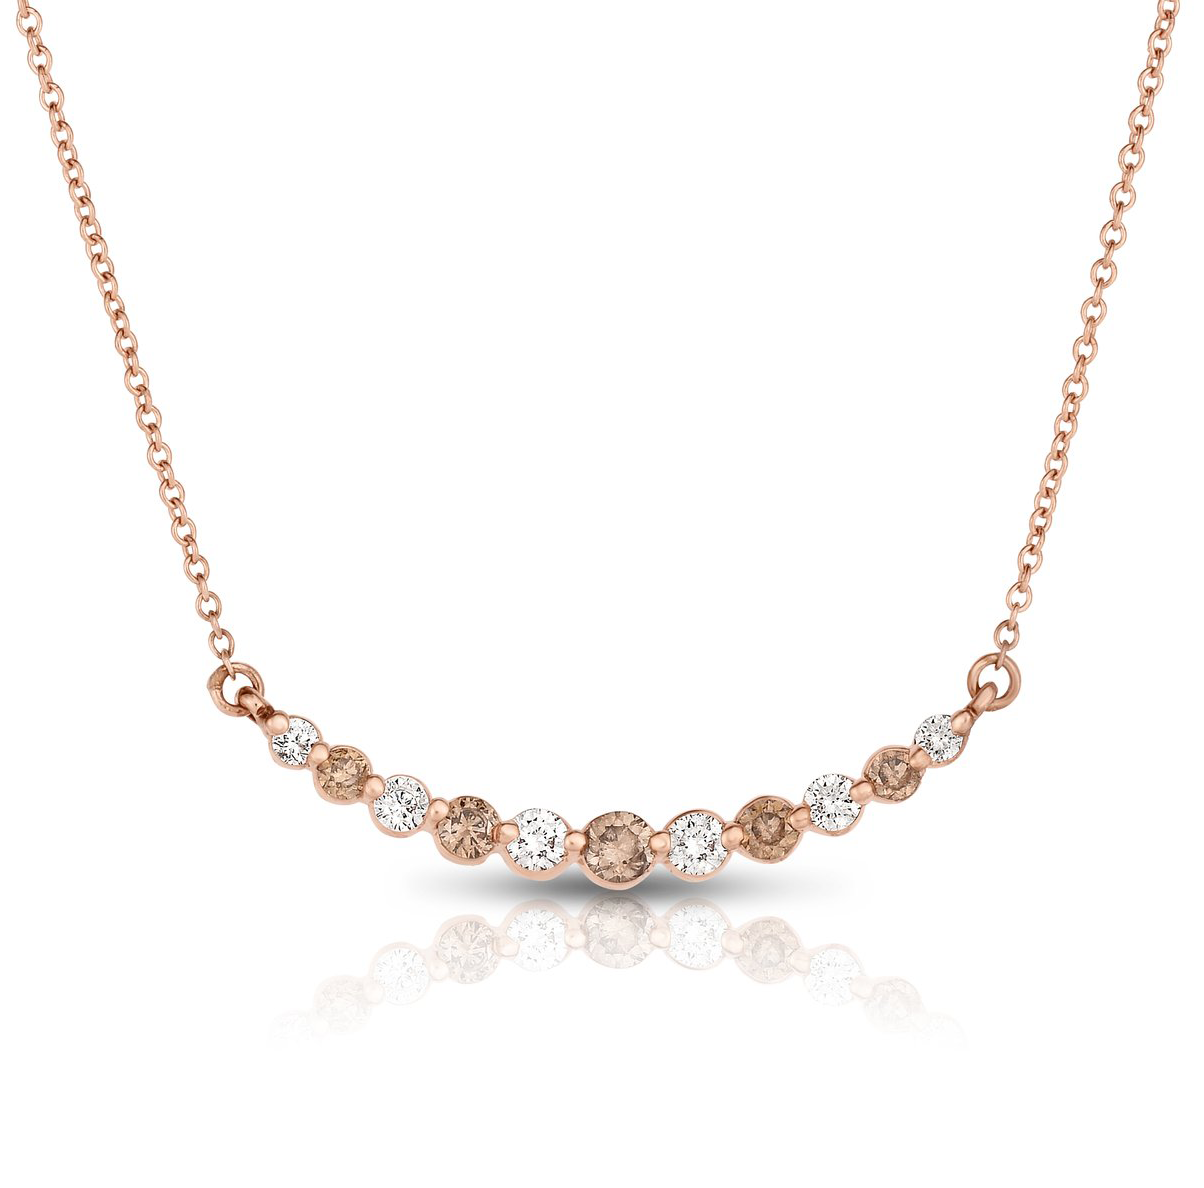 Sabel Collection 14K Rose Gold Mocha and White Diamond Curved Bar Necklace